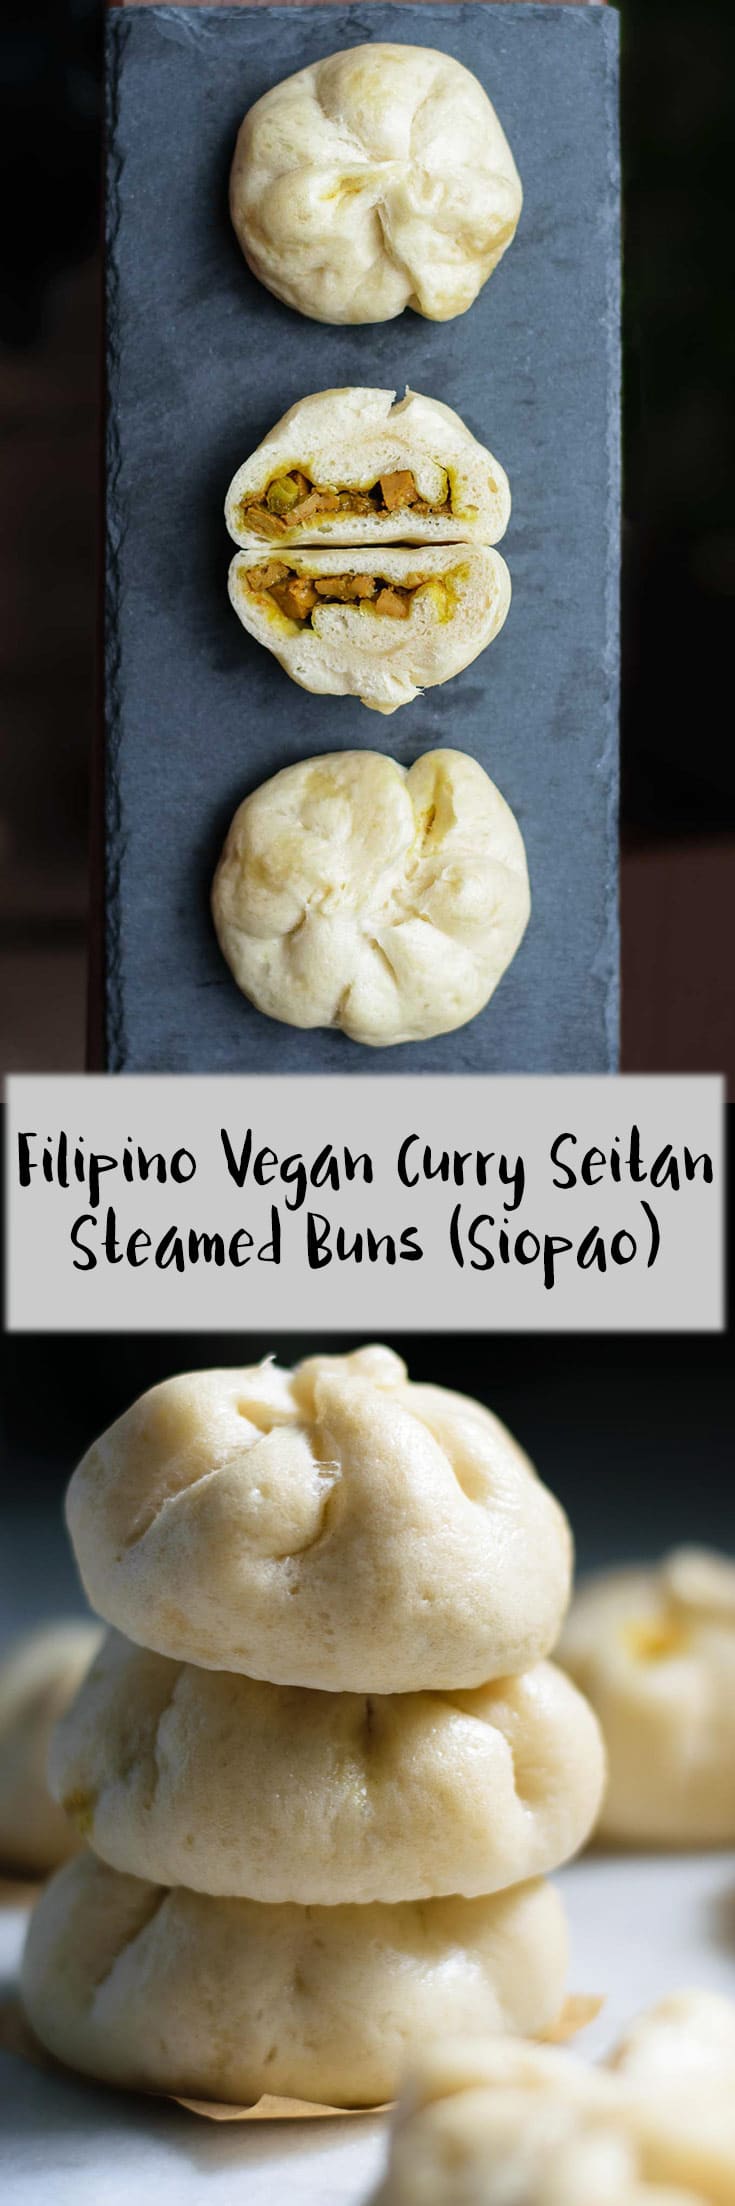 Curry Seitan Siopao | Siopao are traditional Filipino steamed buns, and we've filled them with a flavorful seitan curry in this vegan version. | thecuriouschickpea.com #veganrecipes #vegan #filipino